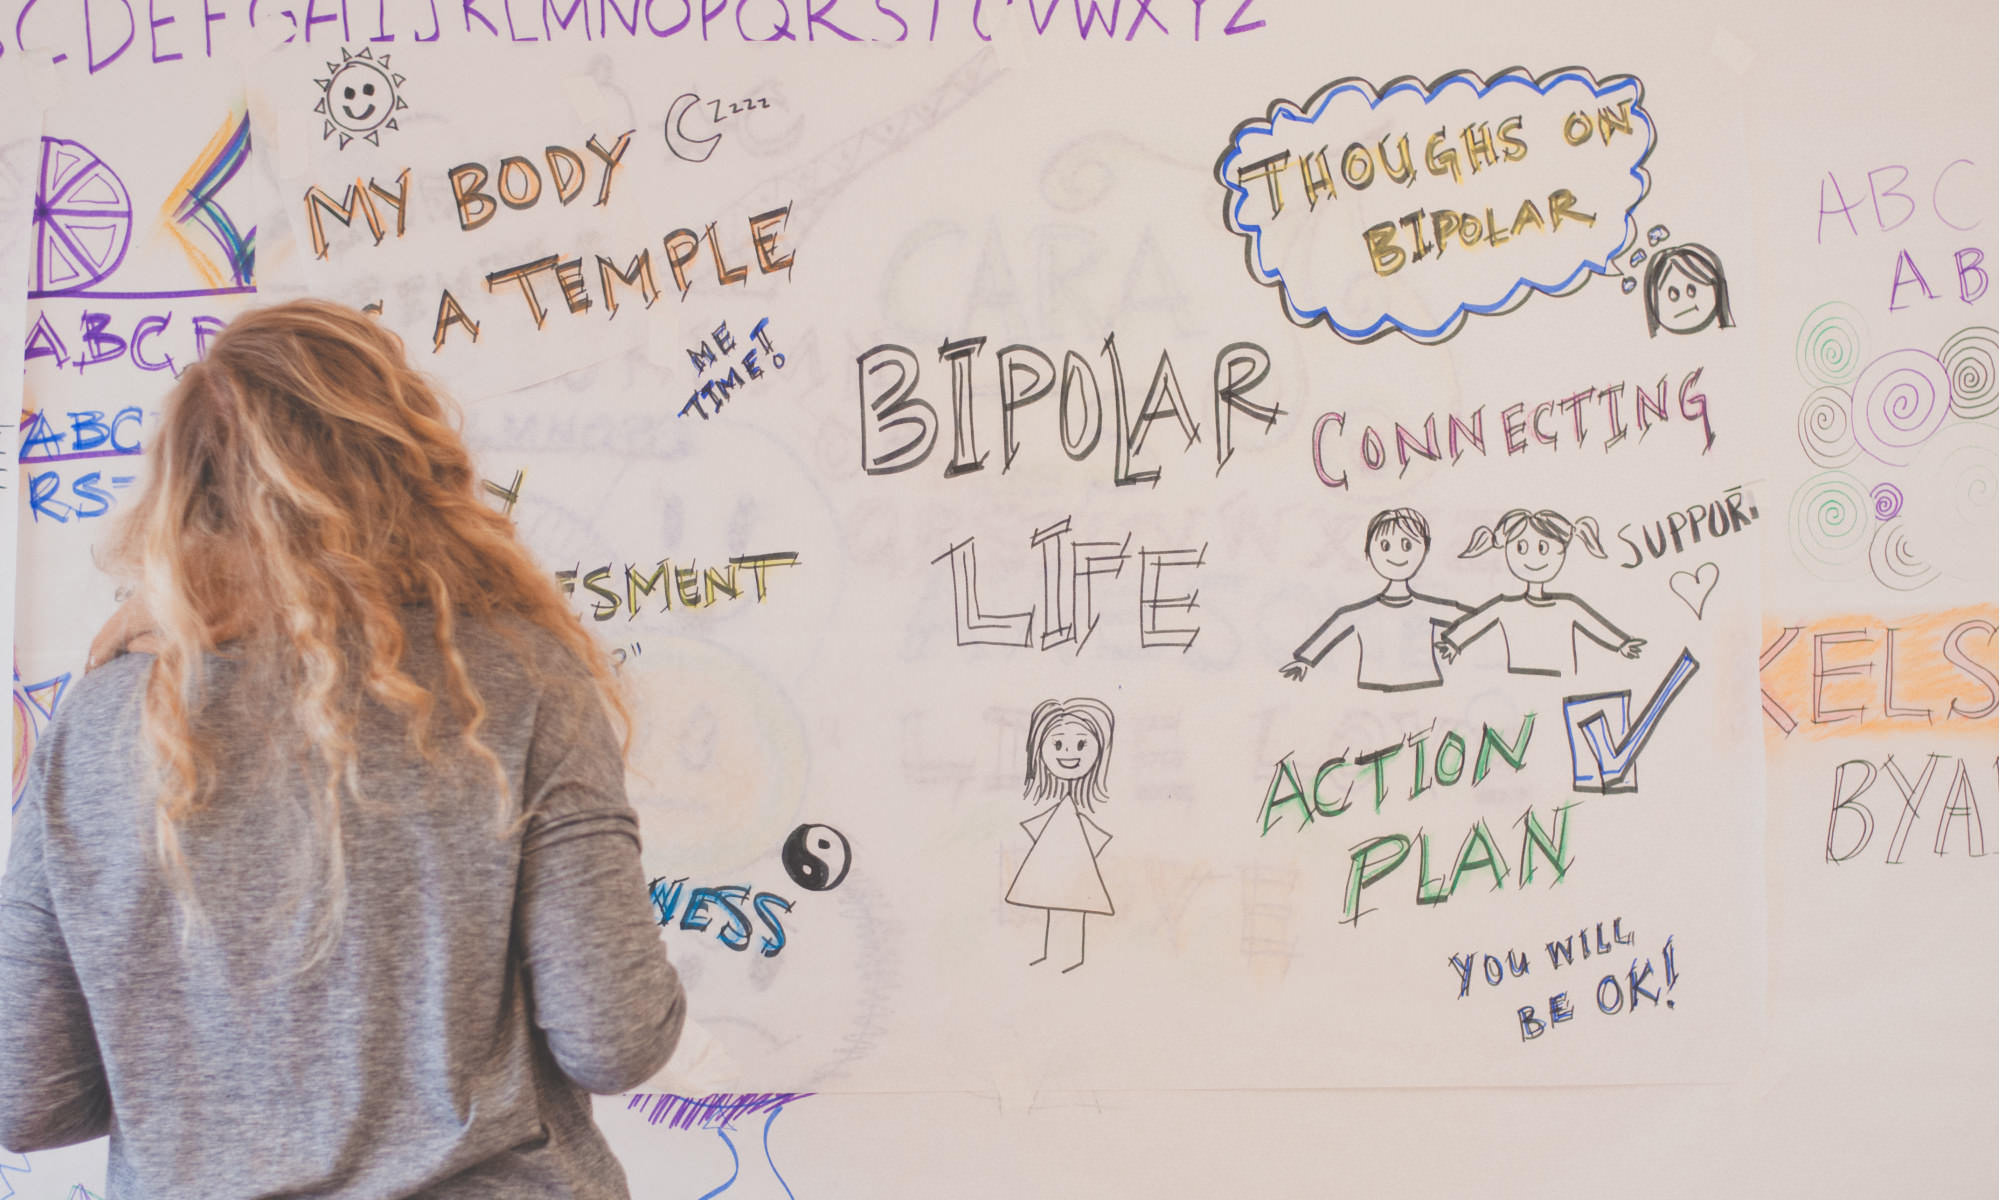 A young woman with long blond hair is facing away from the camera towards a huge wall-mounted sheet of paper. She has written and drawn on the paper. There are pictures of people together, a sun, and messages like, "My body is a temple", "Action Plan", and "You will be ok!"